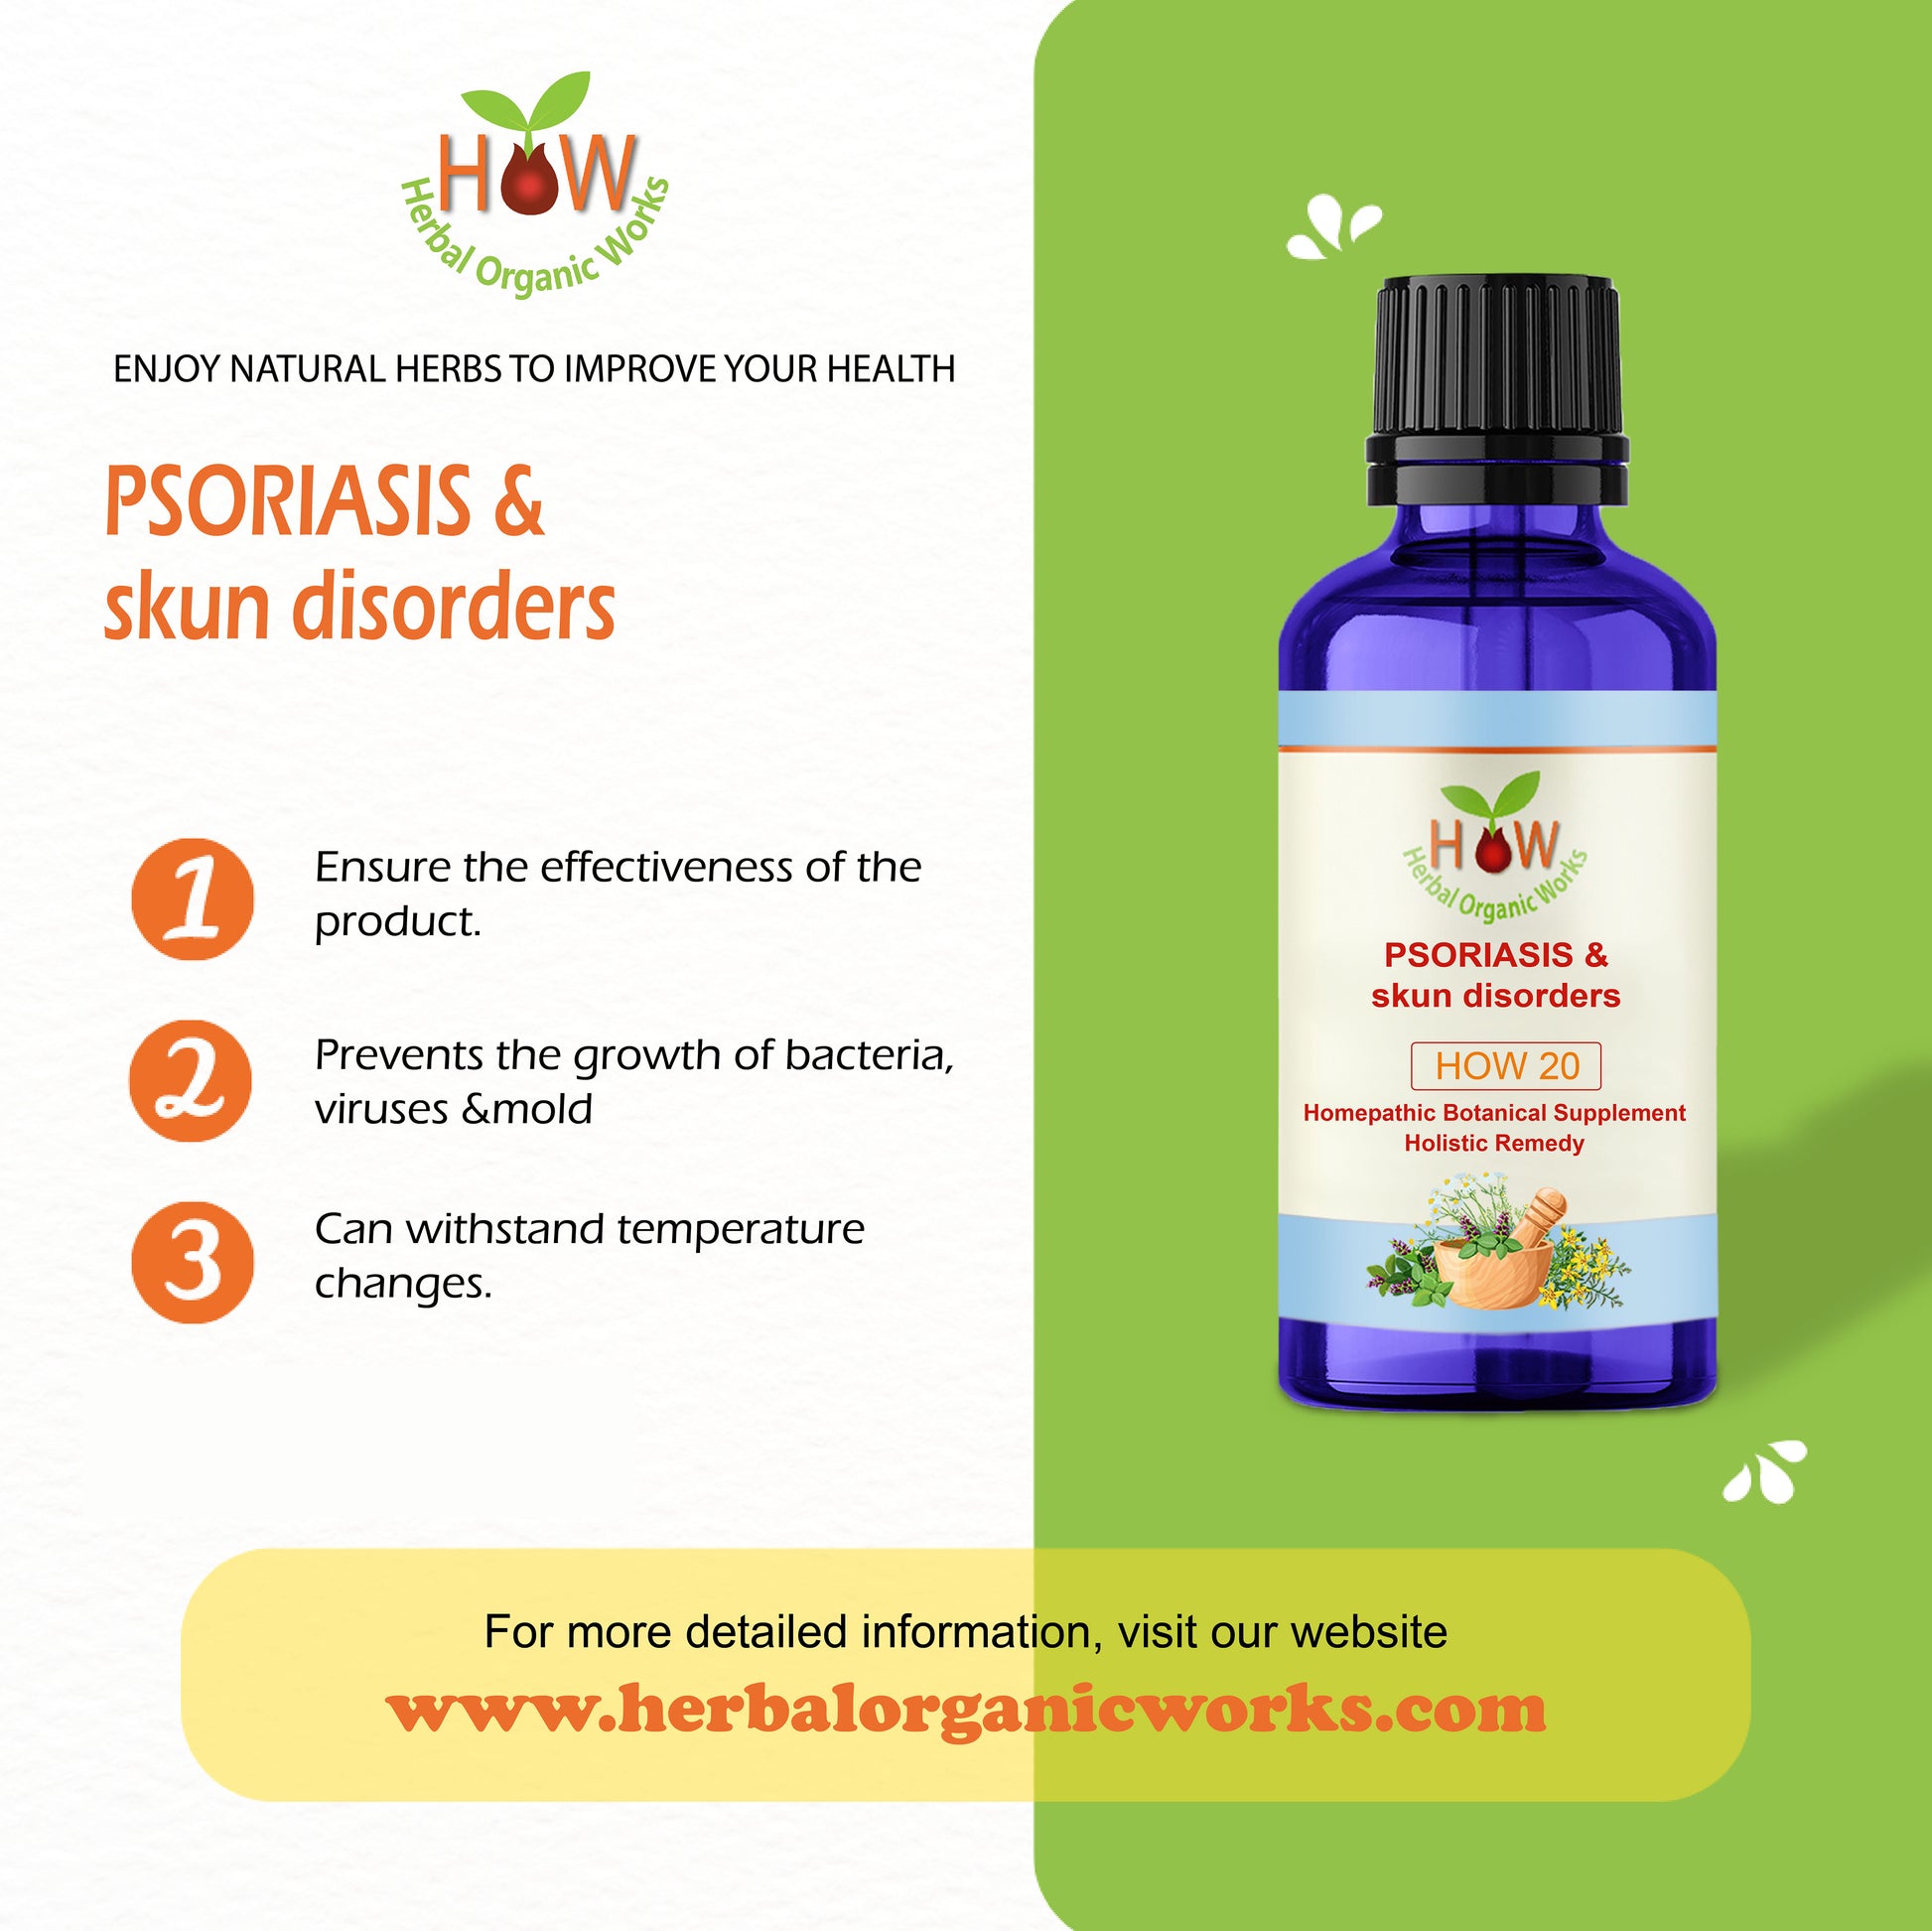 PSORIASIS & SKIN DISORDERS NATURAL REMEDY (HOW7)